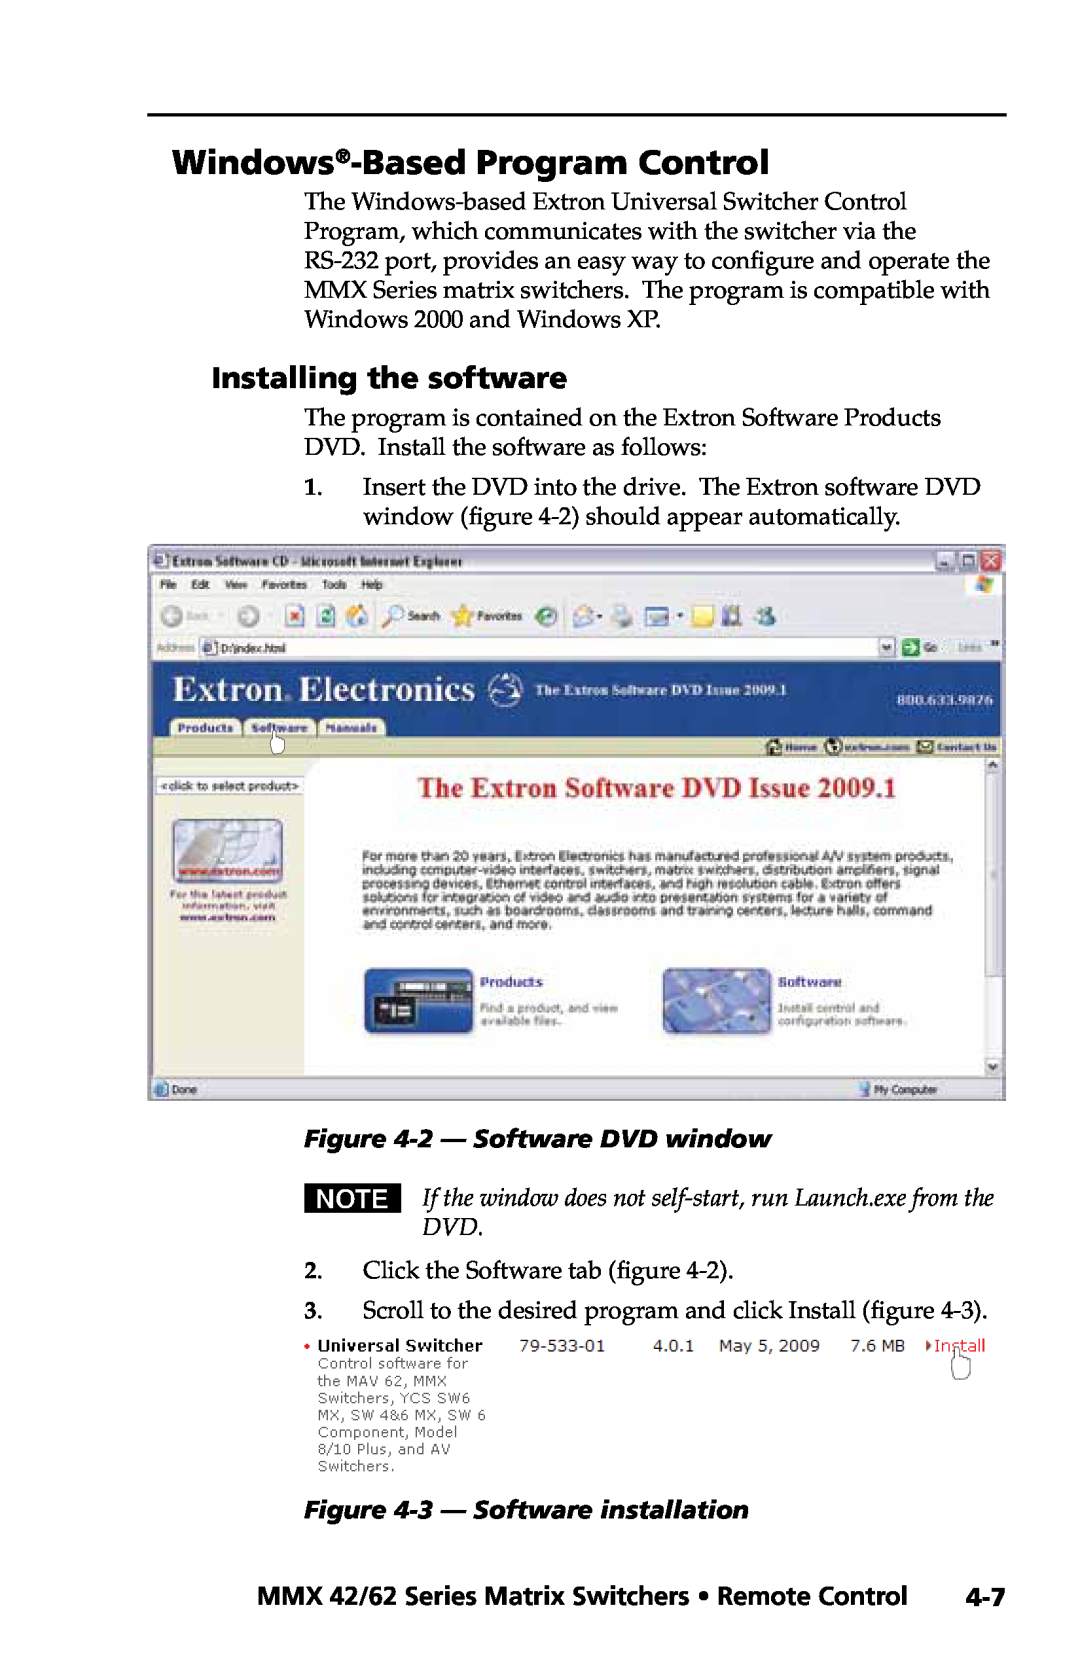 Extron electronic MMX 42, MMX 62 user manual Windows-Based Program Control, Installing the software, 2 - Software DVD window 